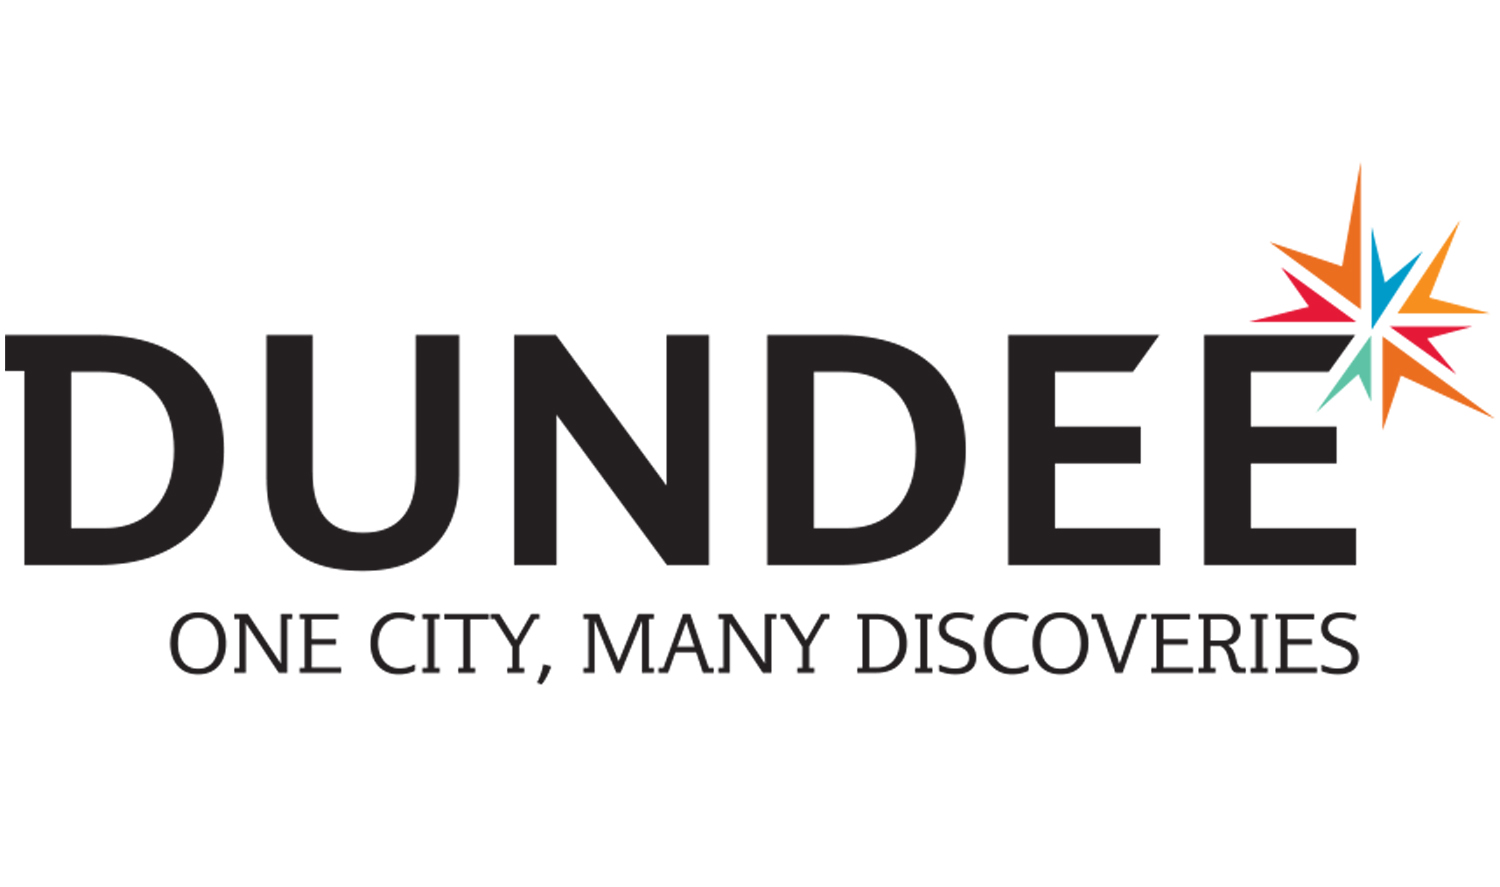 Dundee Logo in black on white background